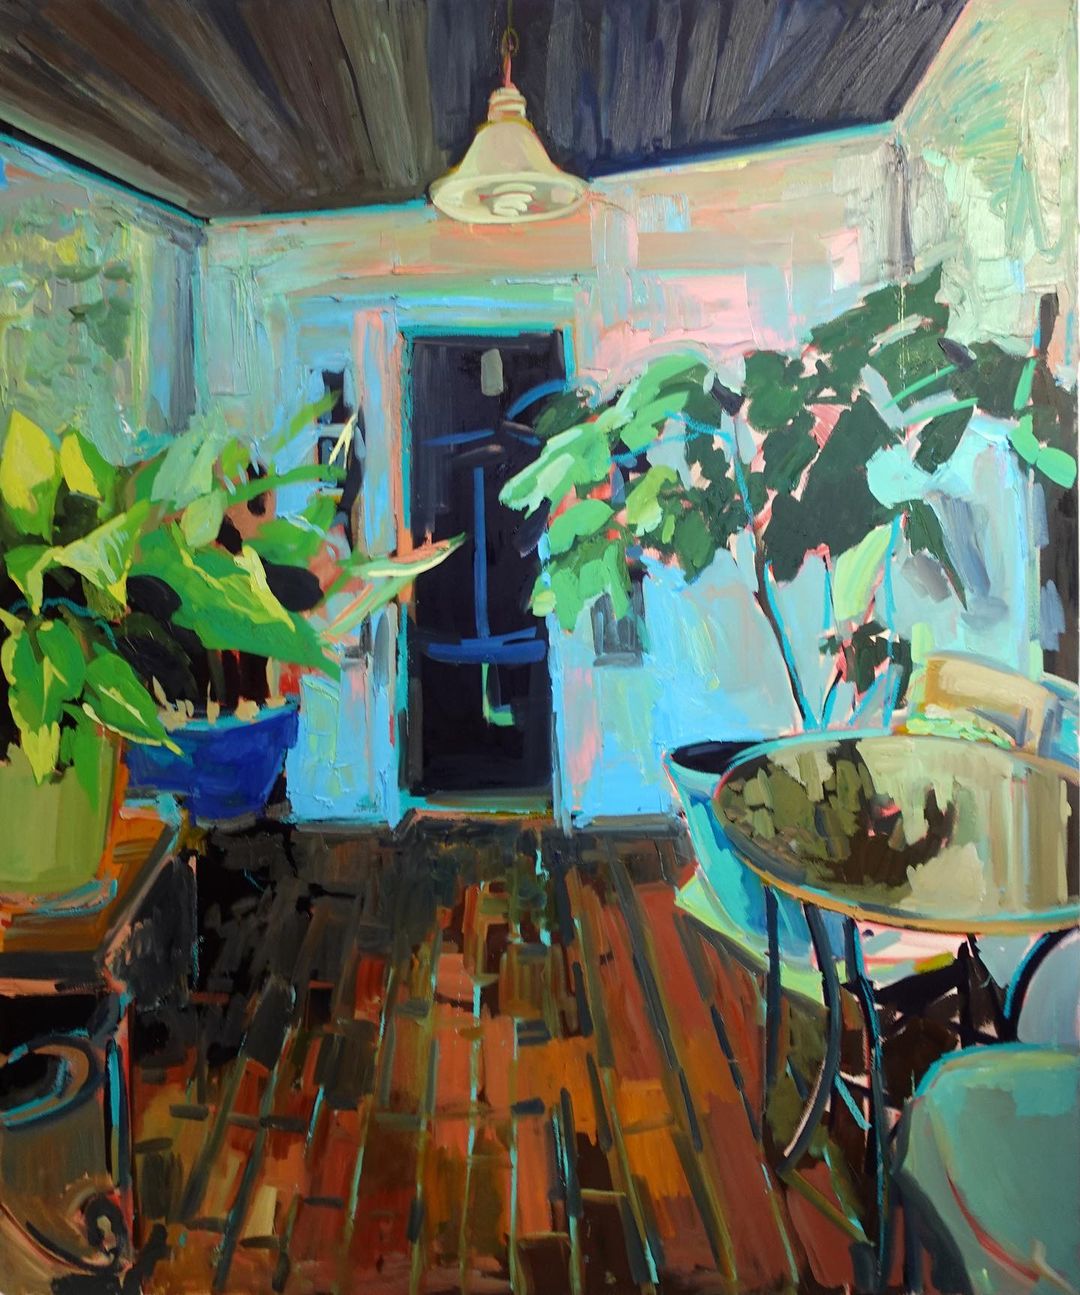 Sublime Paintings Of Intimate Home Spaces By Ekaterina Popova 5